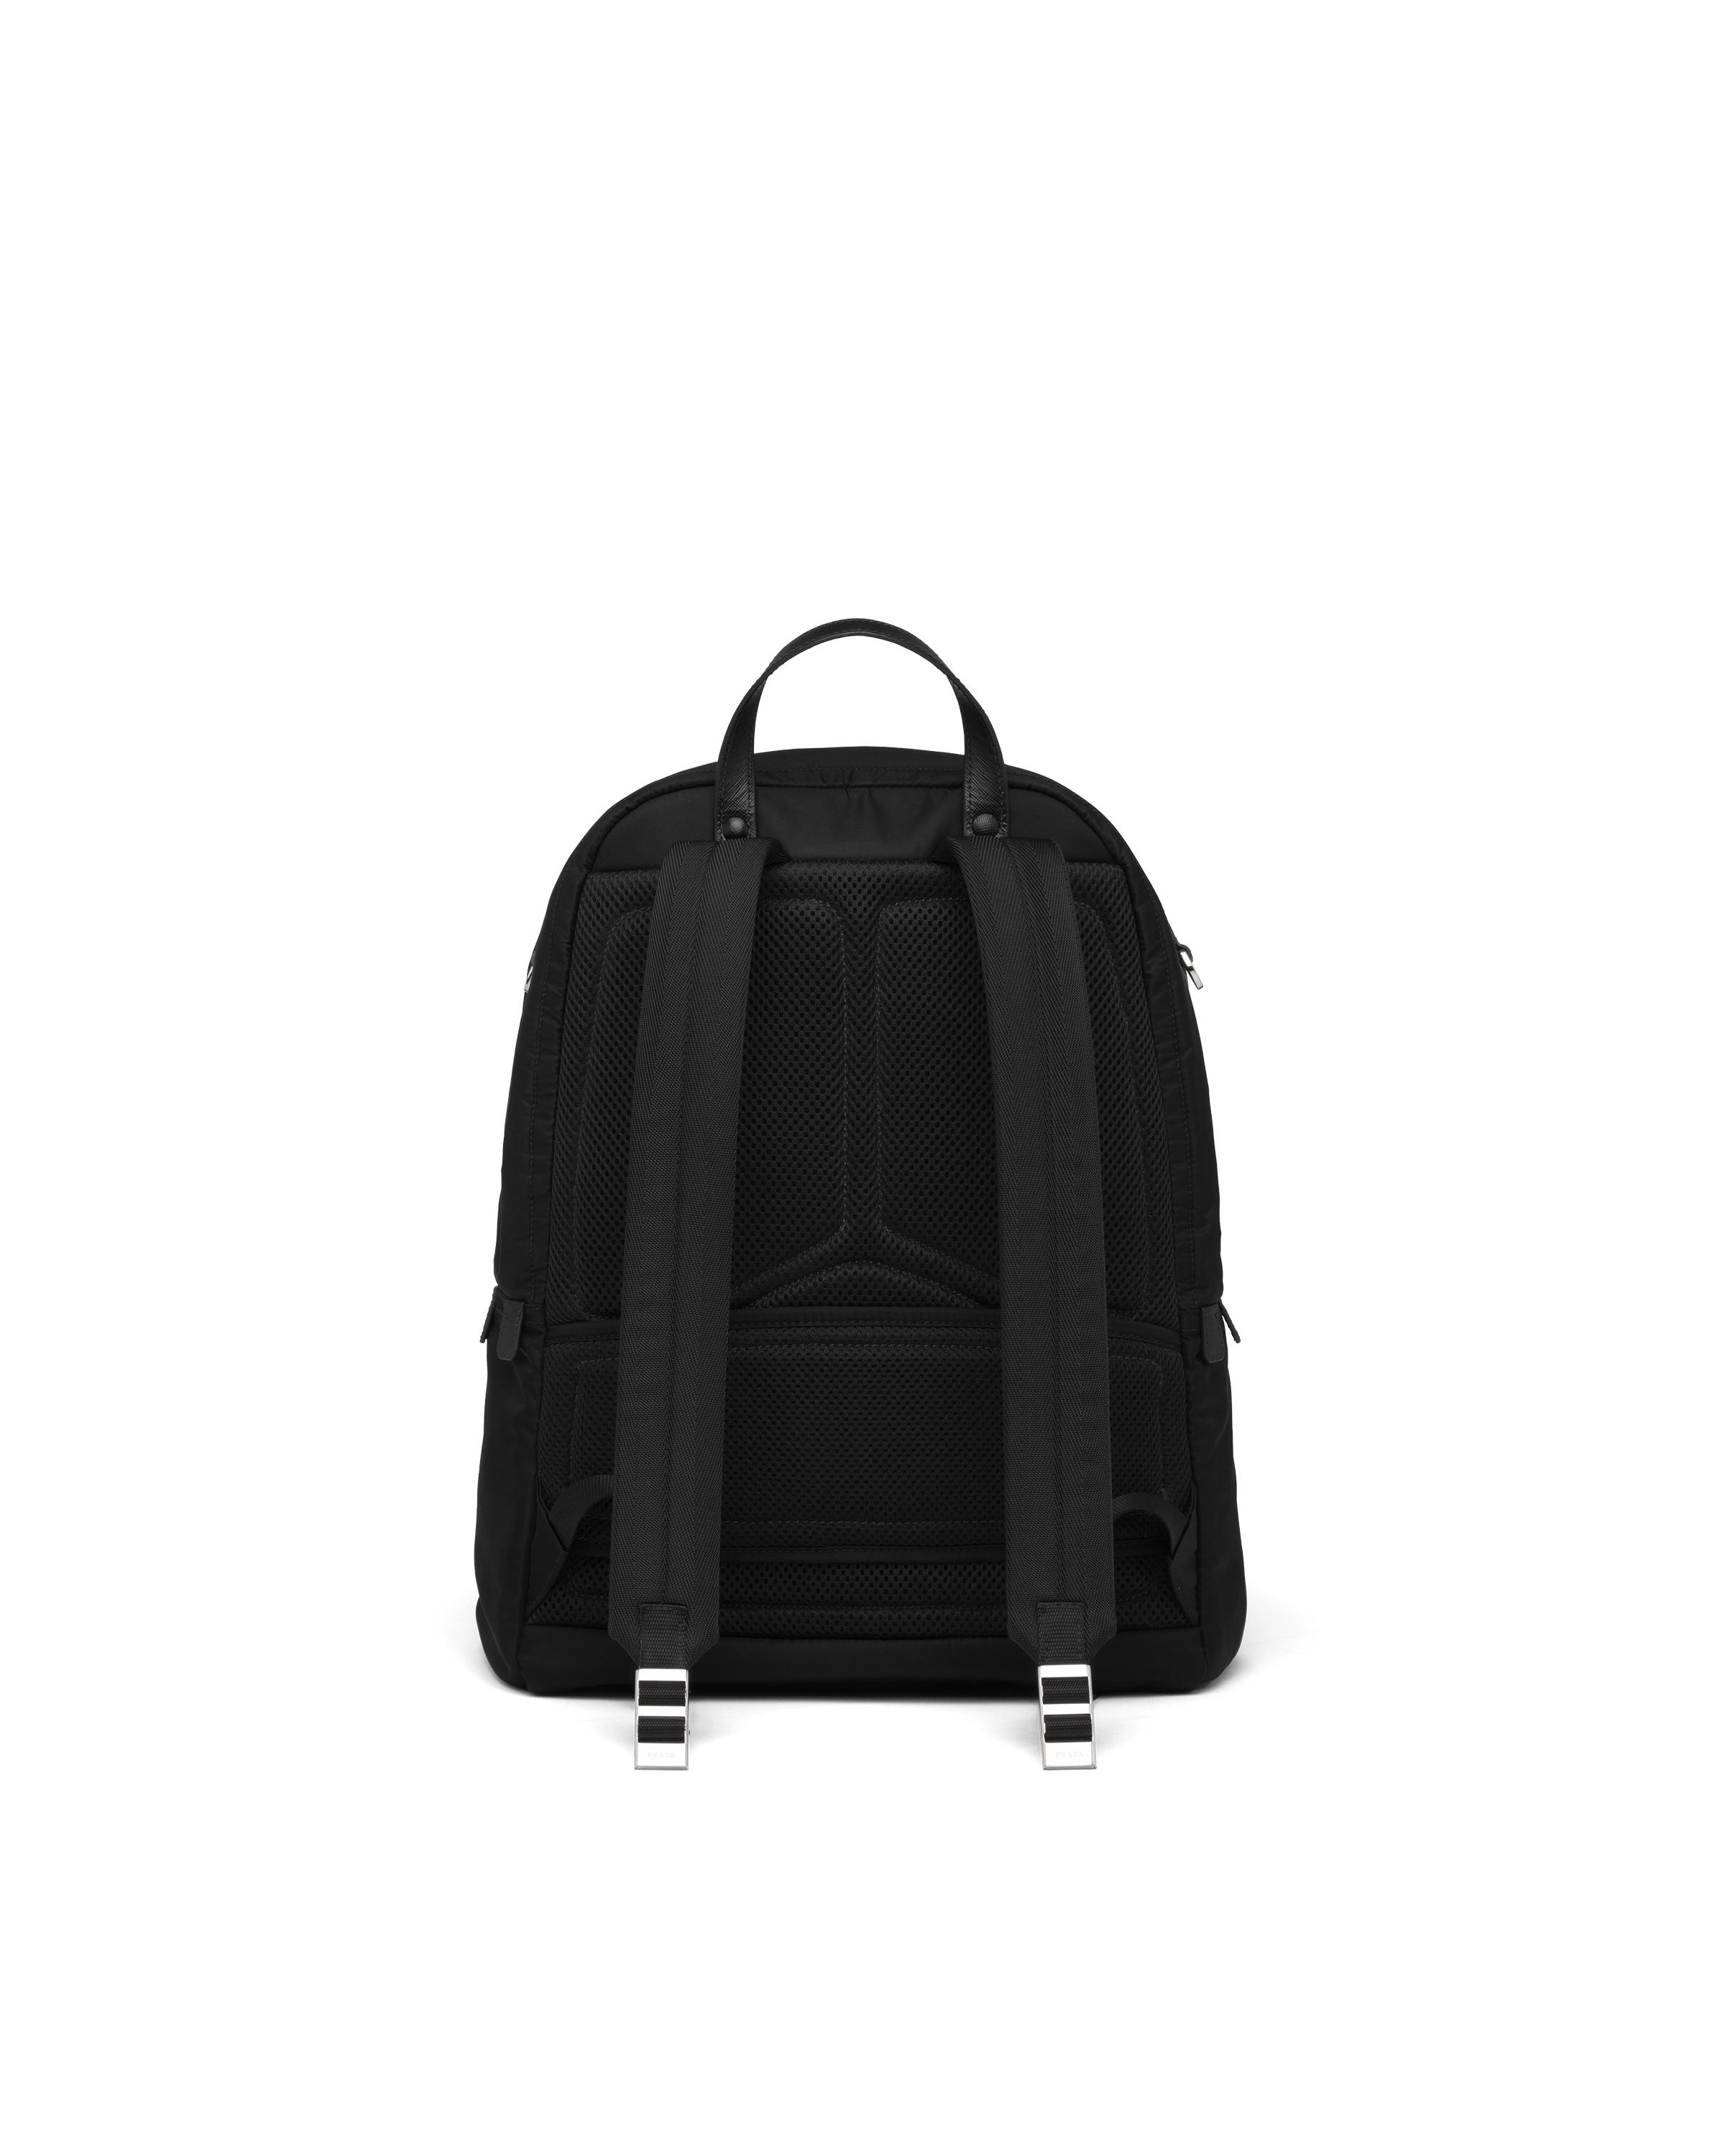 Prada Synthetic Re-nylon And Saffiano Leather Backpack in Black for Men